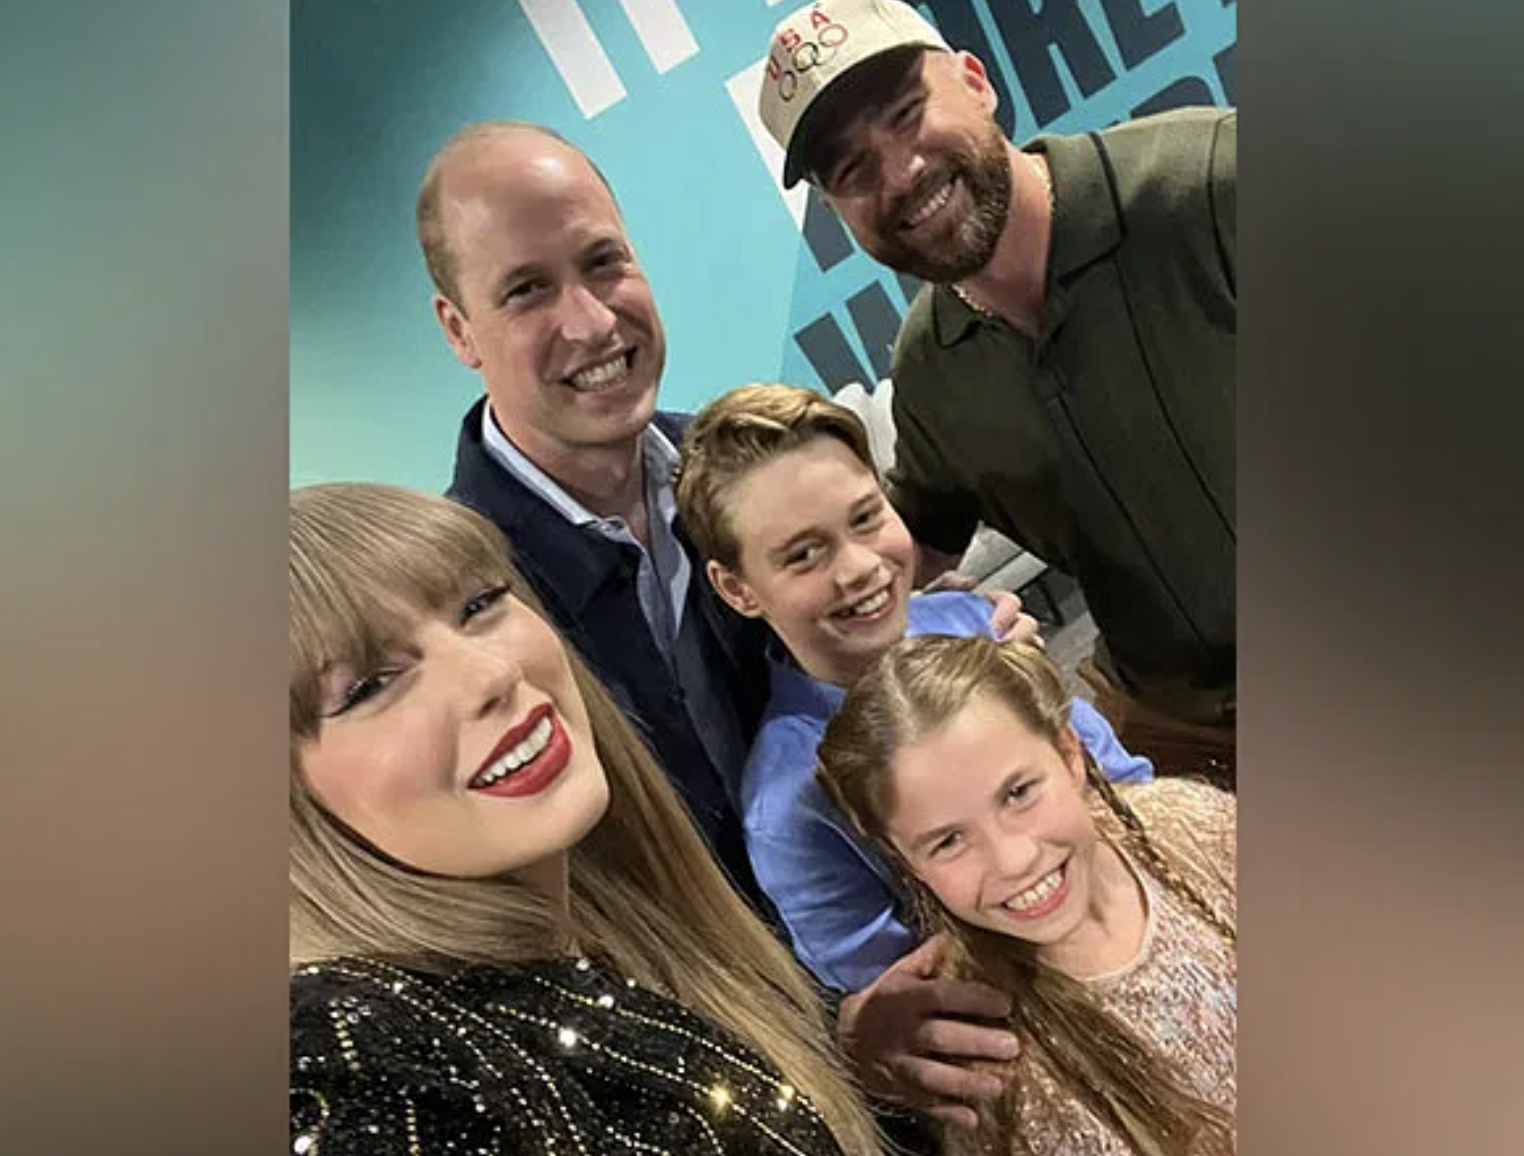 taylor-swift-drops-selfie-with-prince-william-his-kids-after-eras-tour-wembley-show